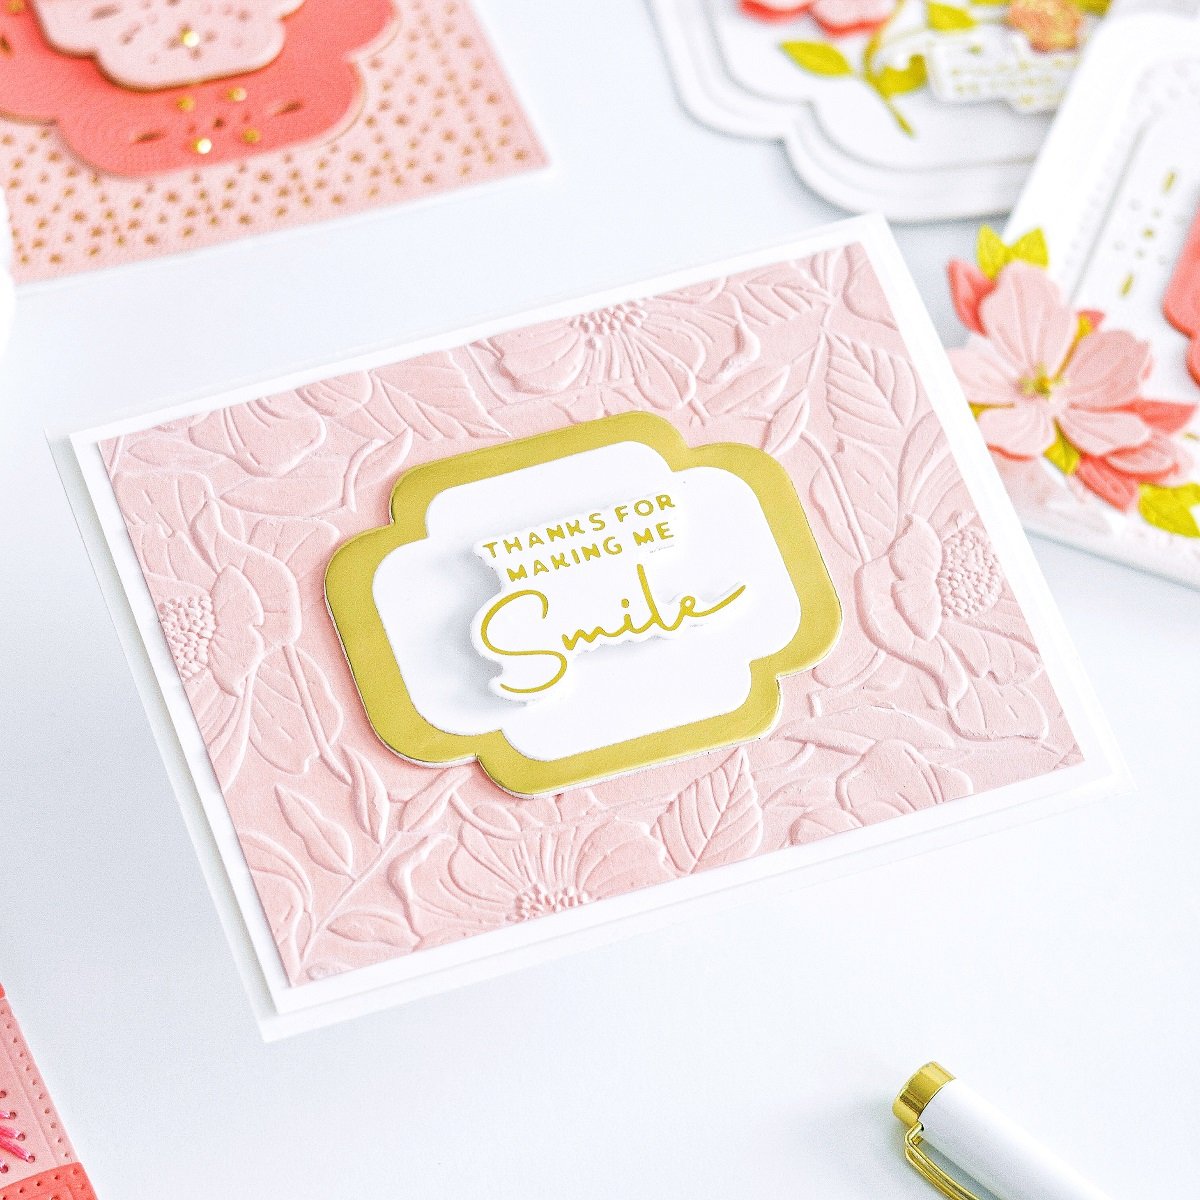 Spellbinders Four Petal Collection┃Inspiration Cards